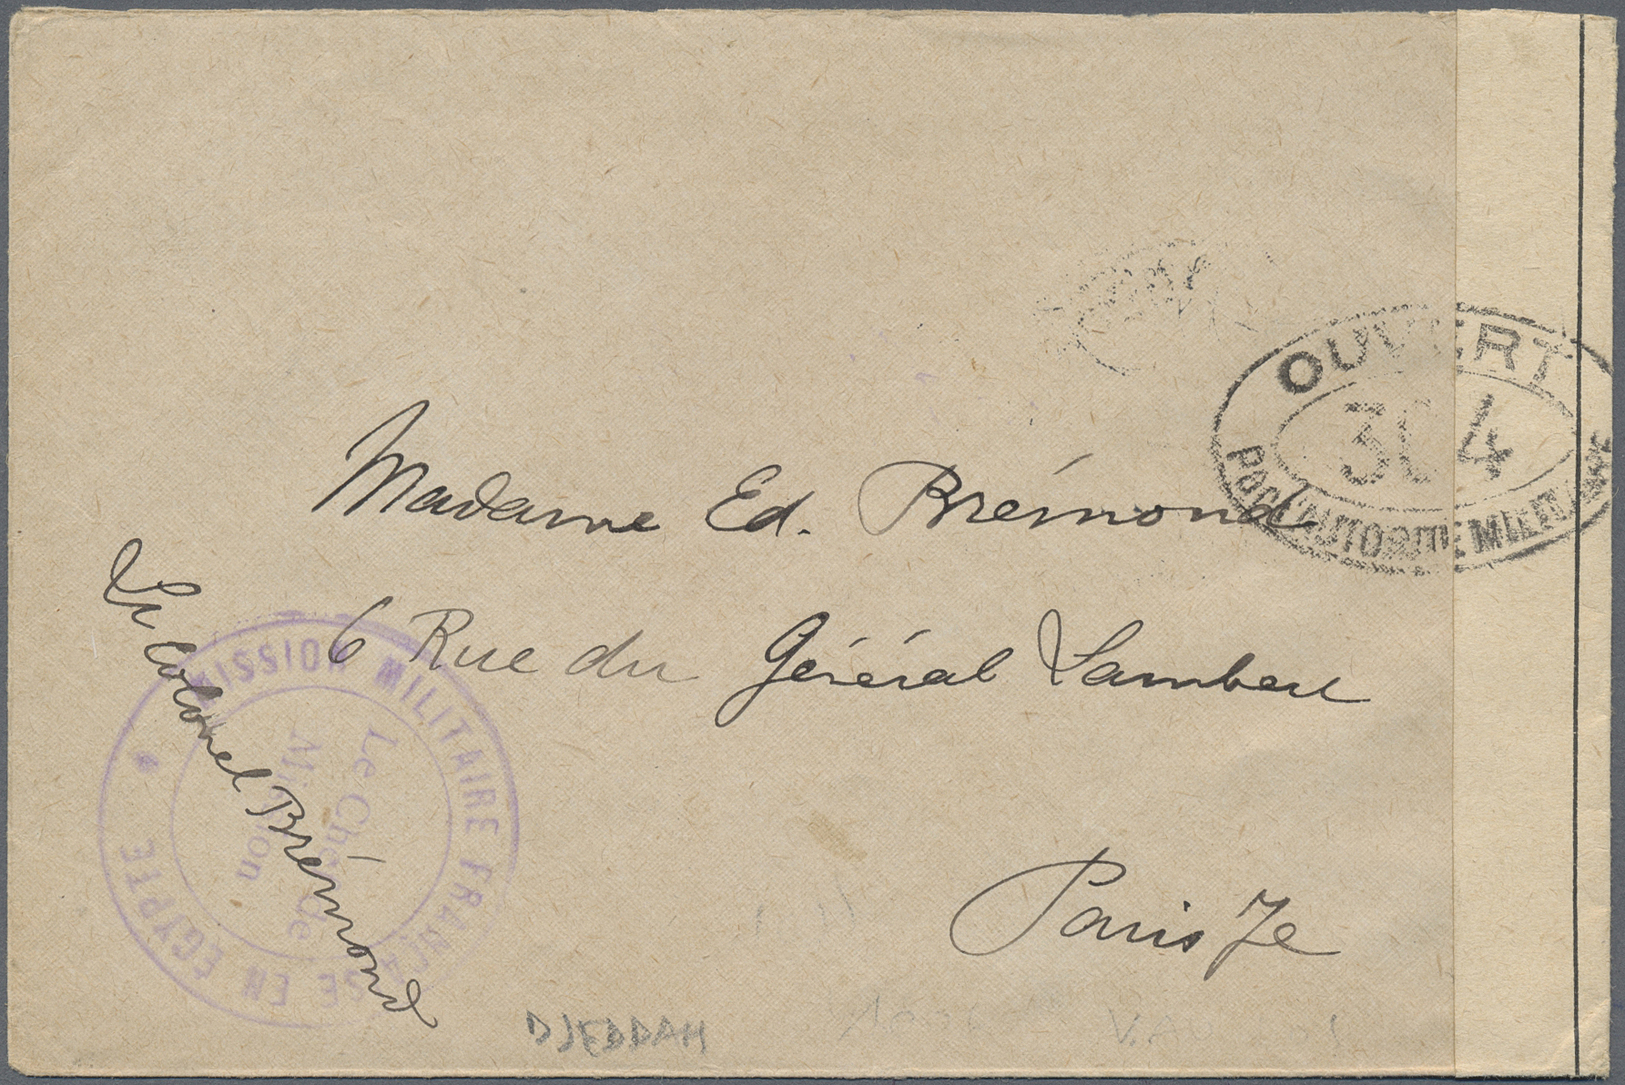 Br Saudi-Arabien - Hedschas: 1916. Stampless Envelope Addressed To France Cancelled By Circular 'Mission Militaire Franc - Arabie Saoudite